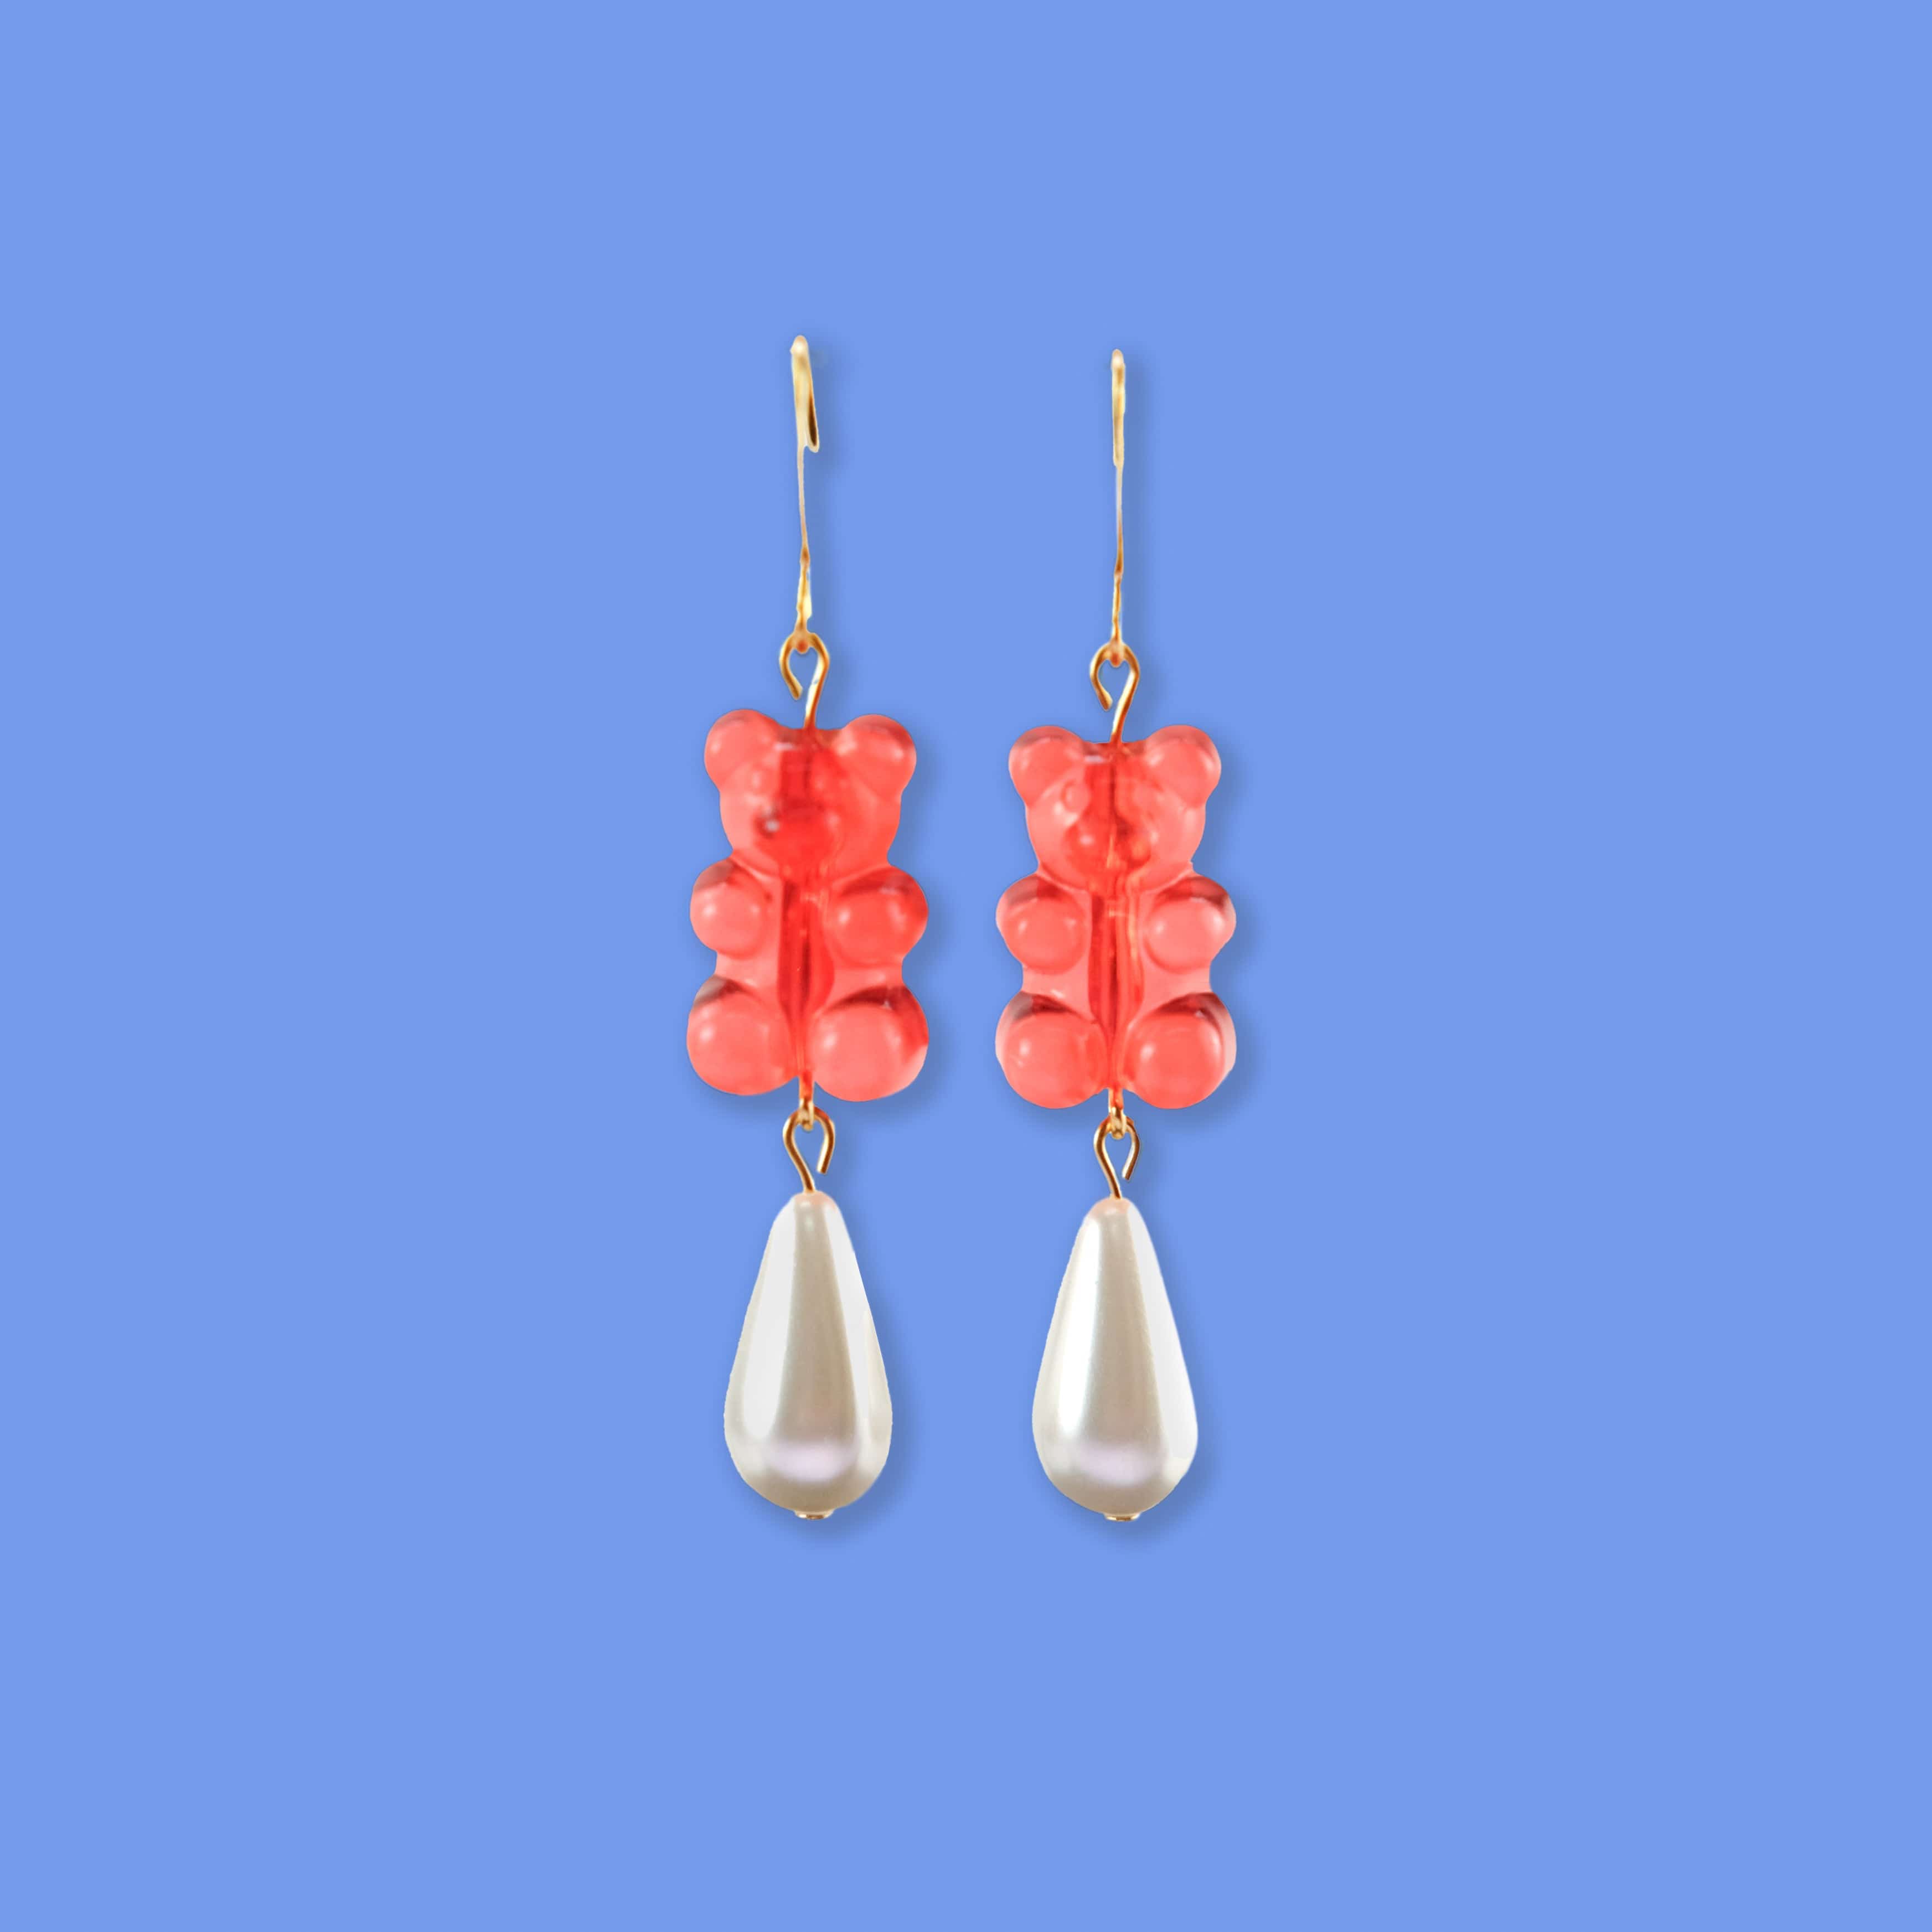 Nostalgic, cute and classy gummy bear dangly earrings with elegant pearl drops #color_red